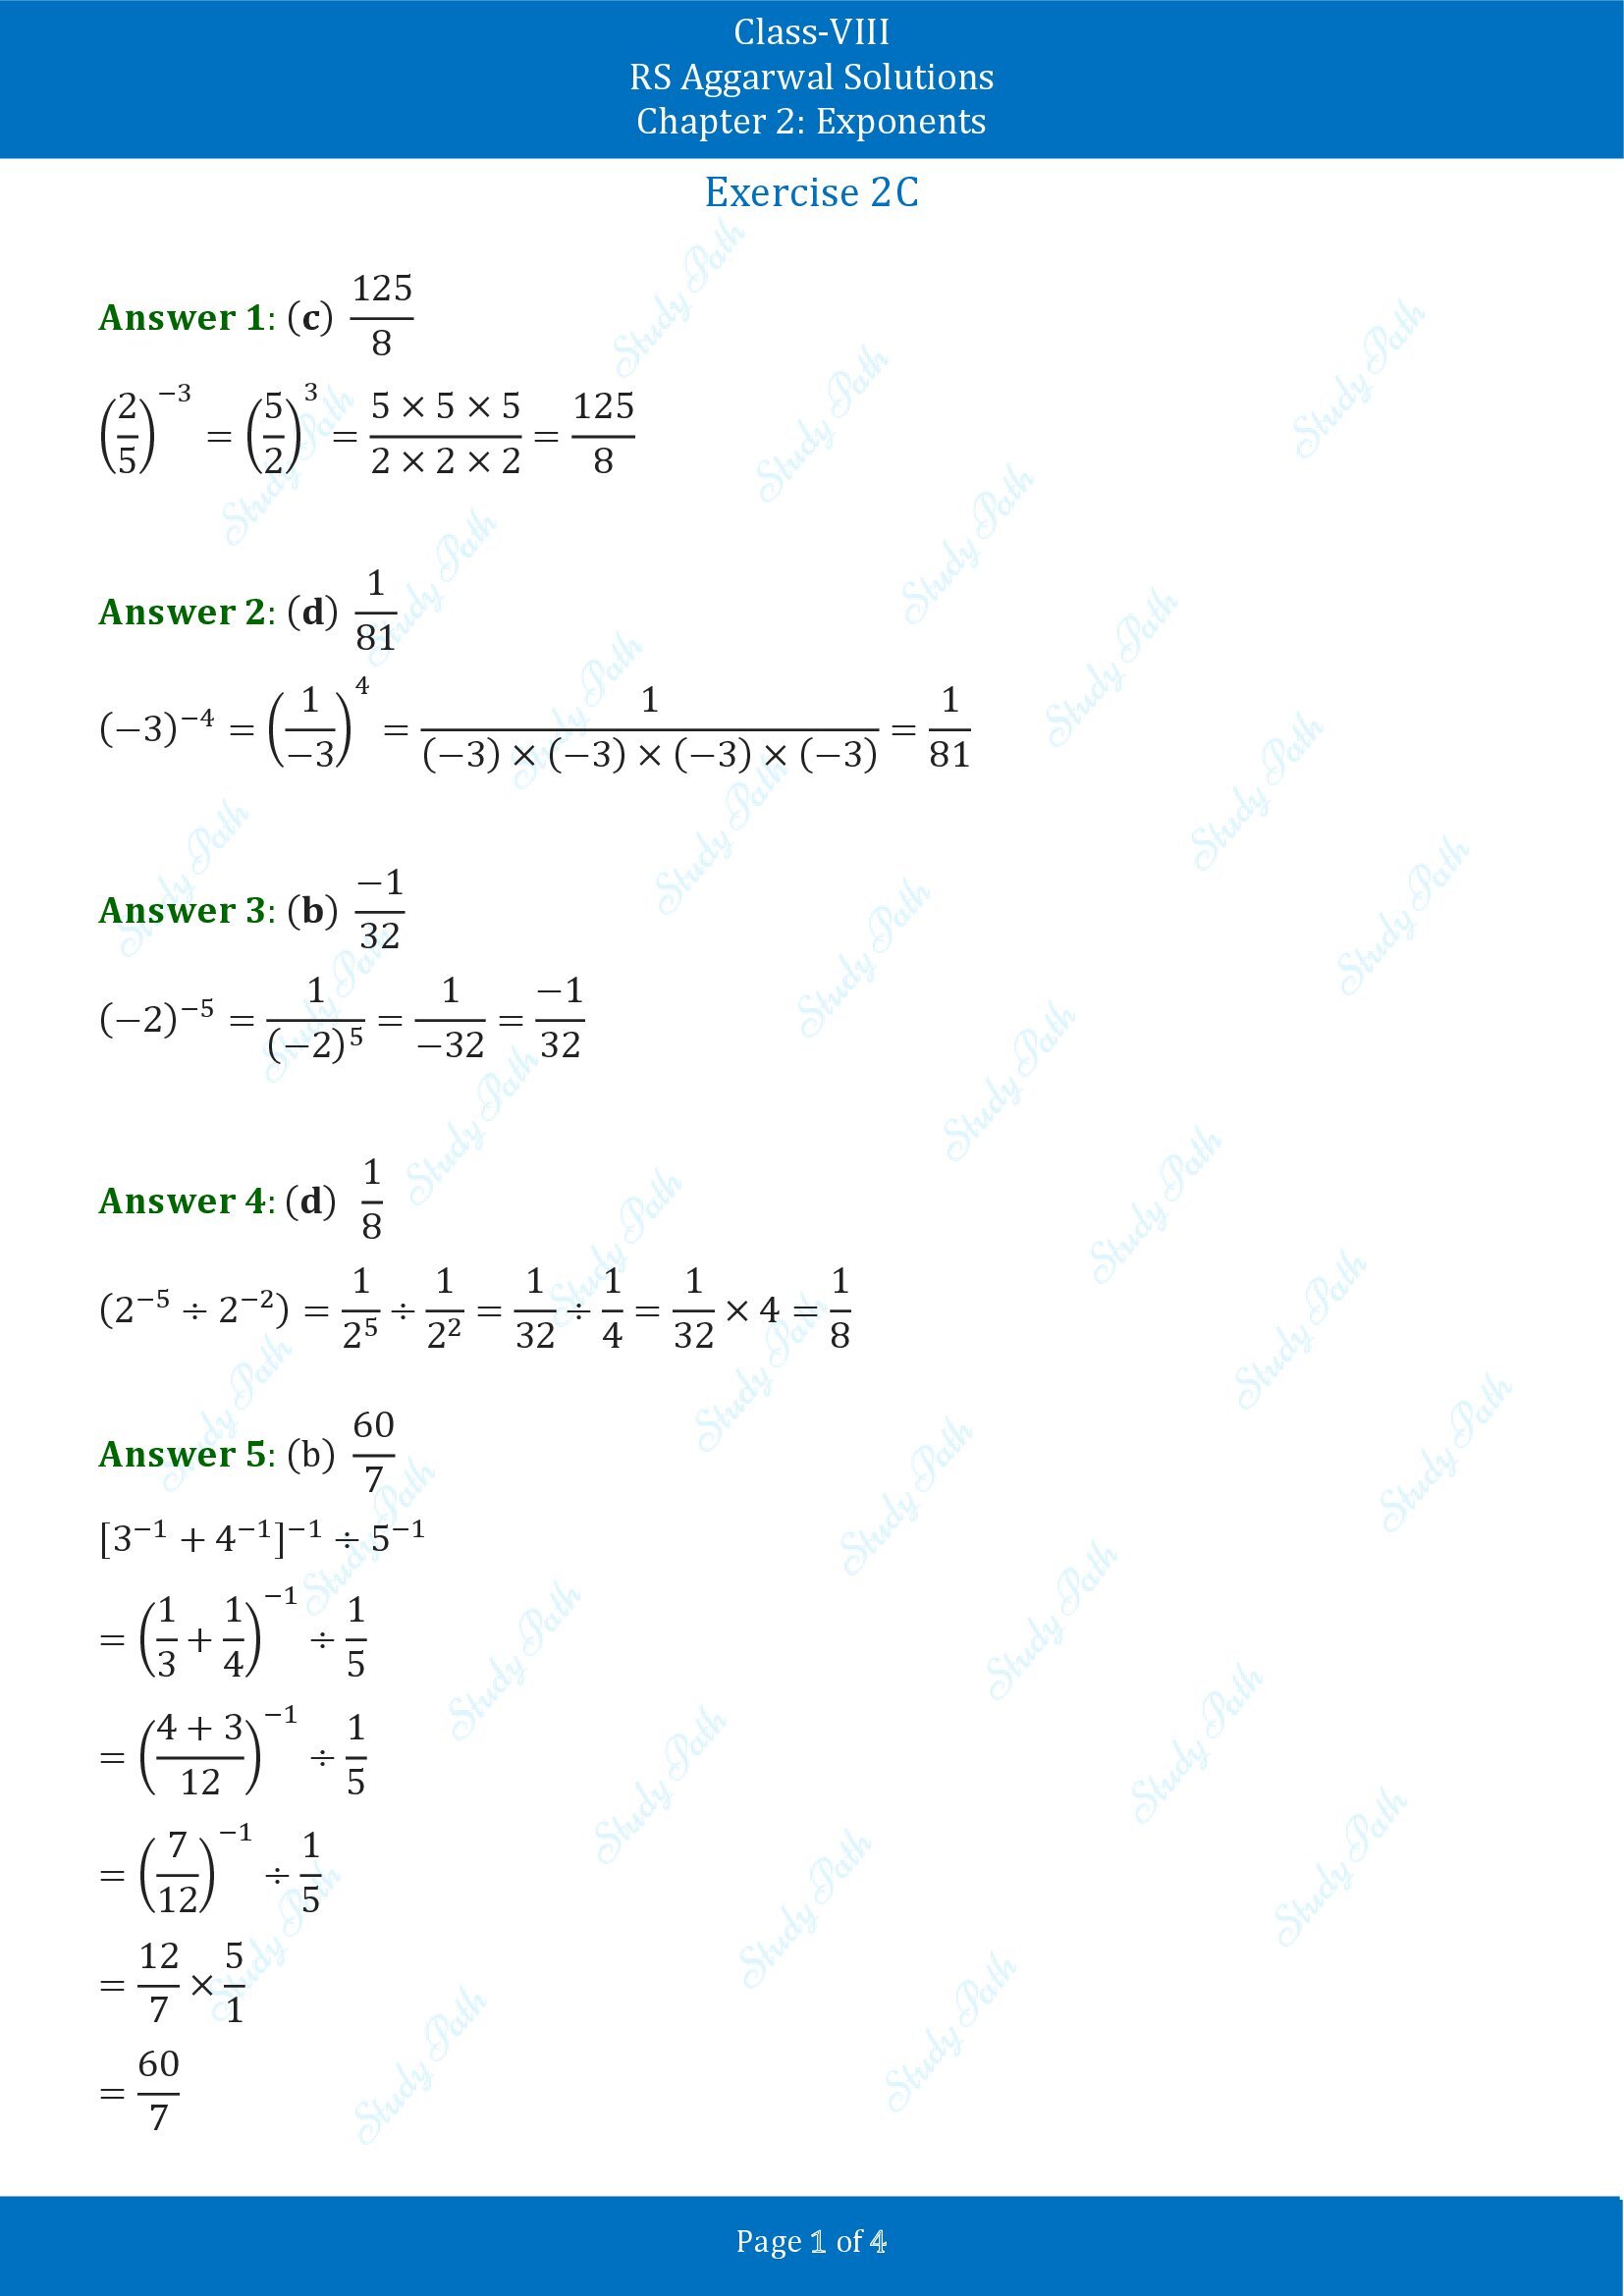 RS Aggarwal Solutions Class 8 Chapter 2 Exponents Exercise 2C MCQs 00001